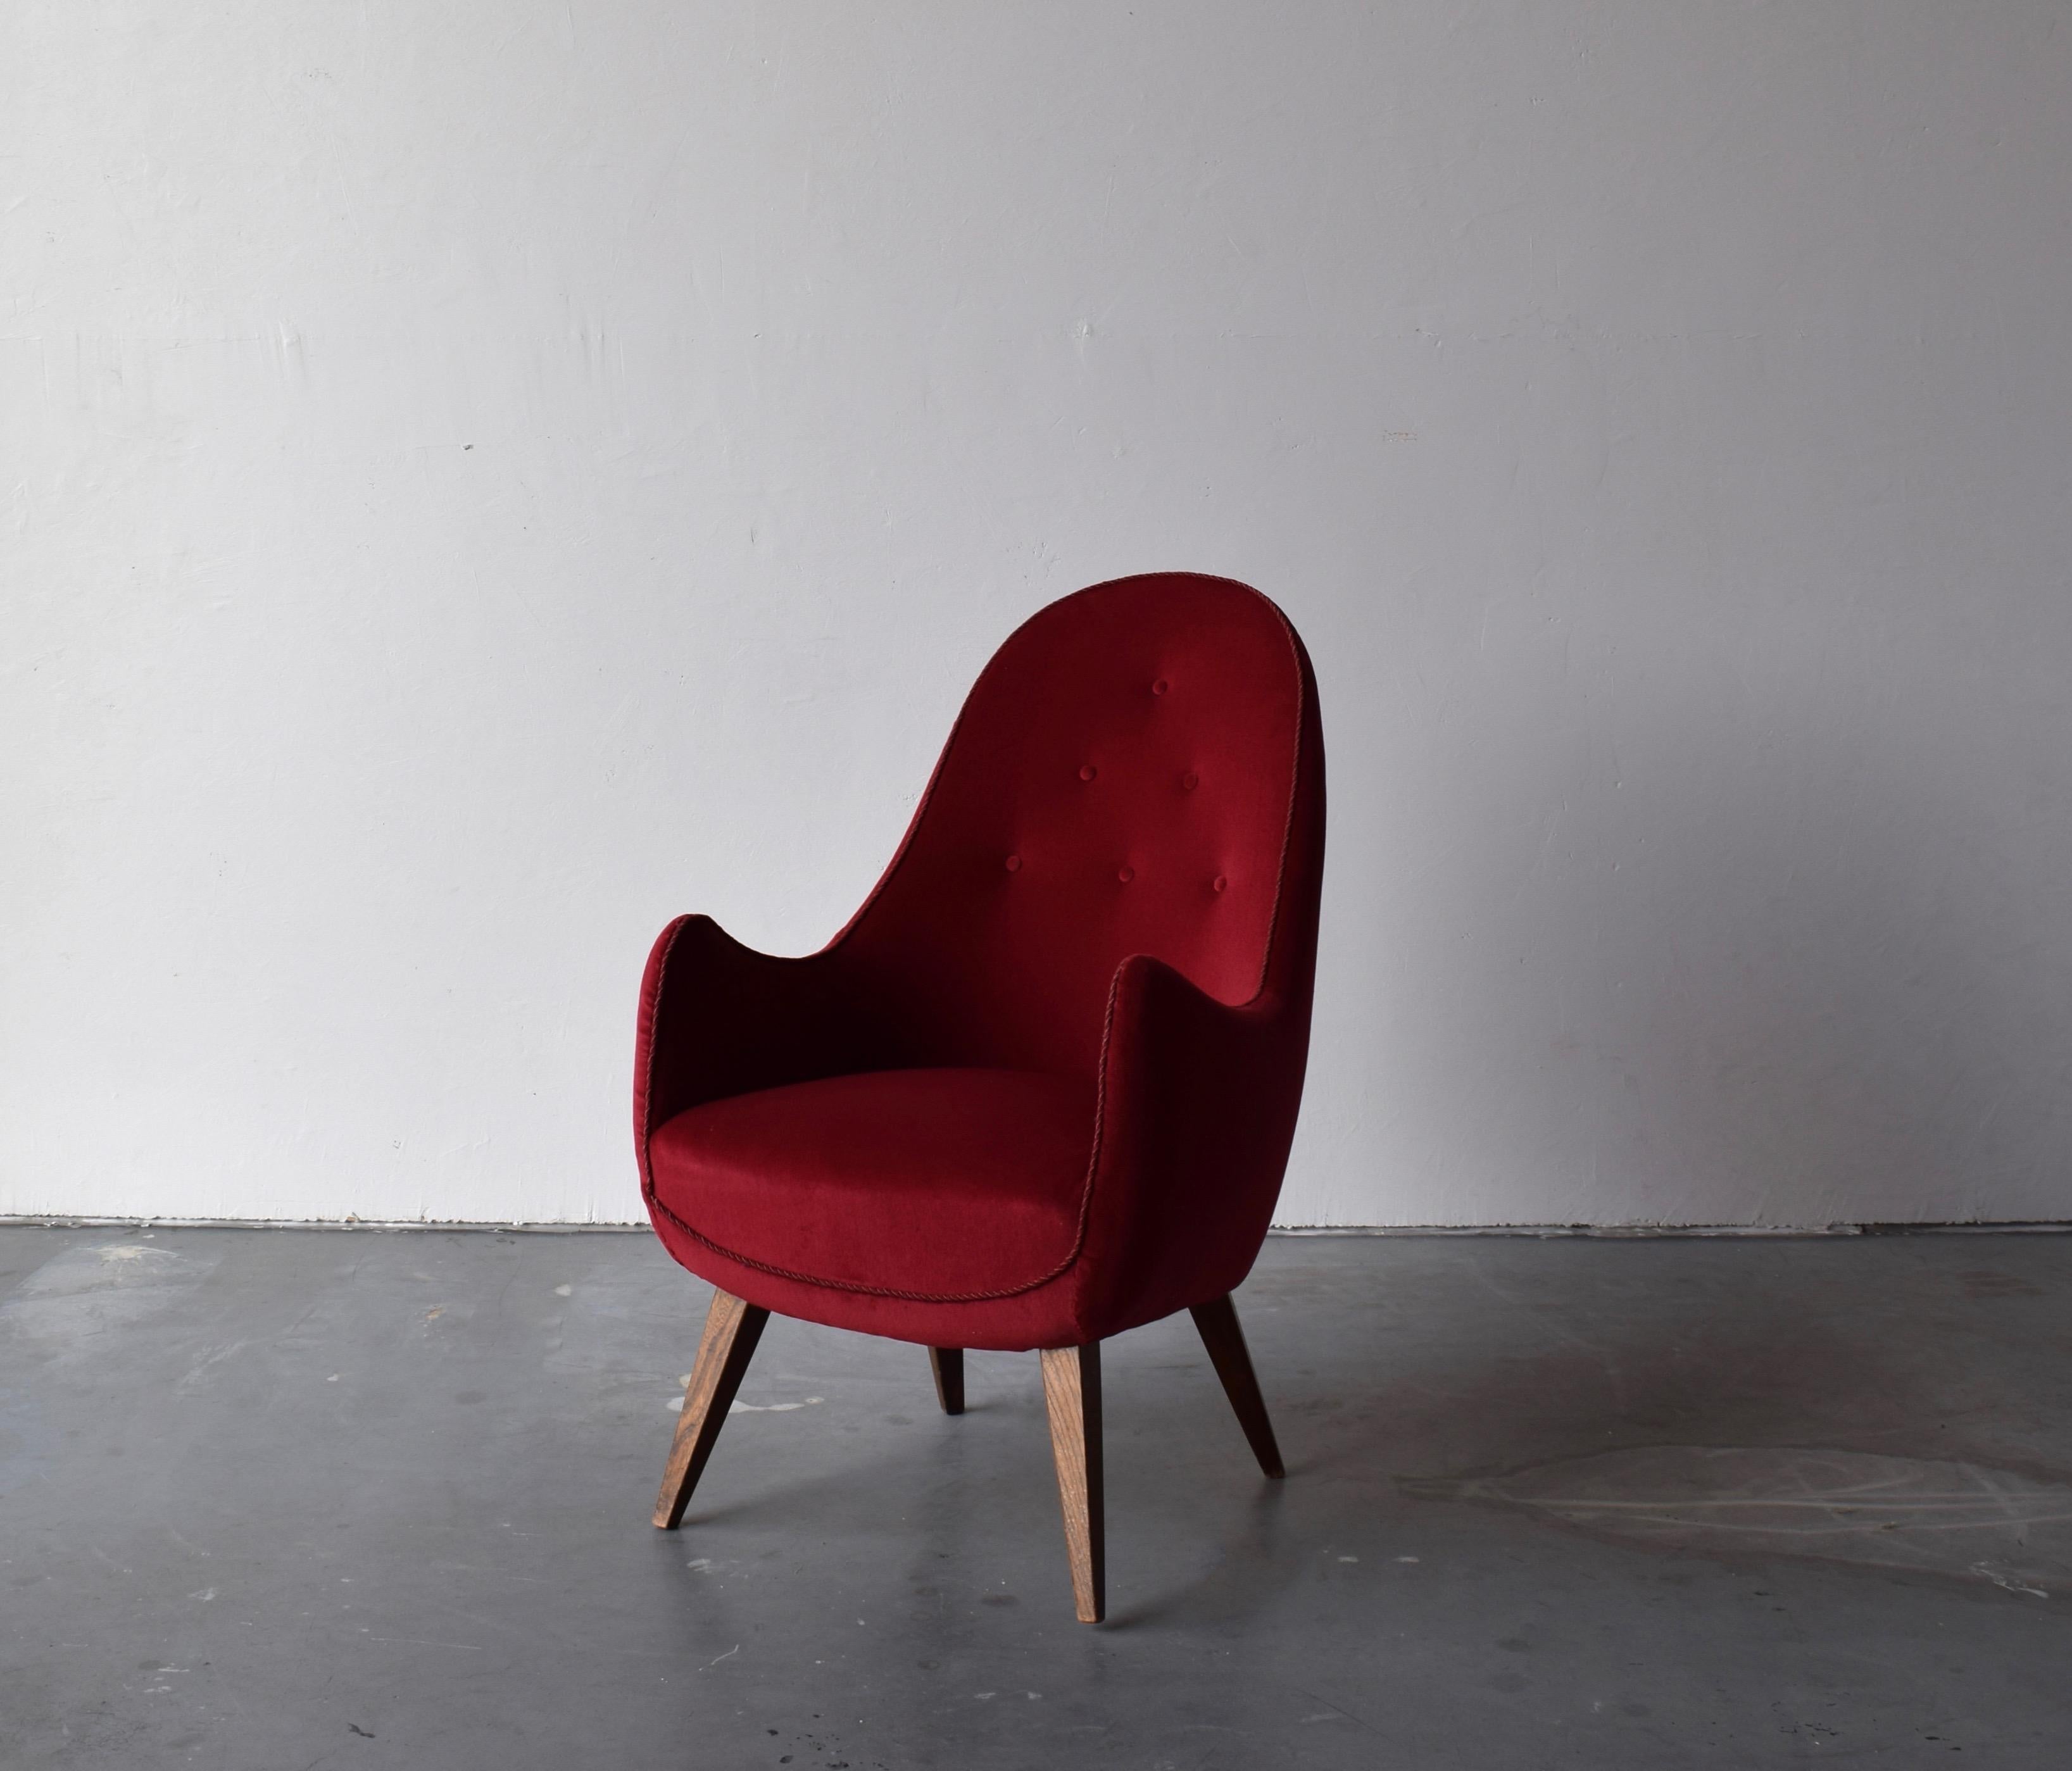 A lounge chair / armchair / side chair. Designed and produced in Sweden, 1950s. Maker and designer unknown. 

Other designers of the period include Jean Royère, Gio Ponti, Finn Juhl, Vladimir Kagan.